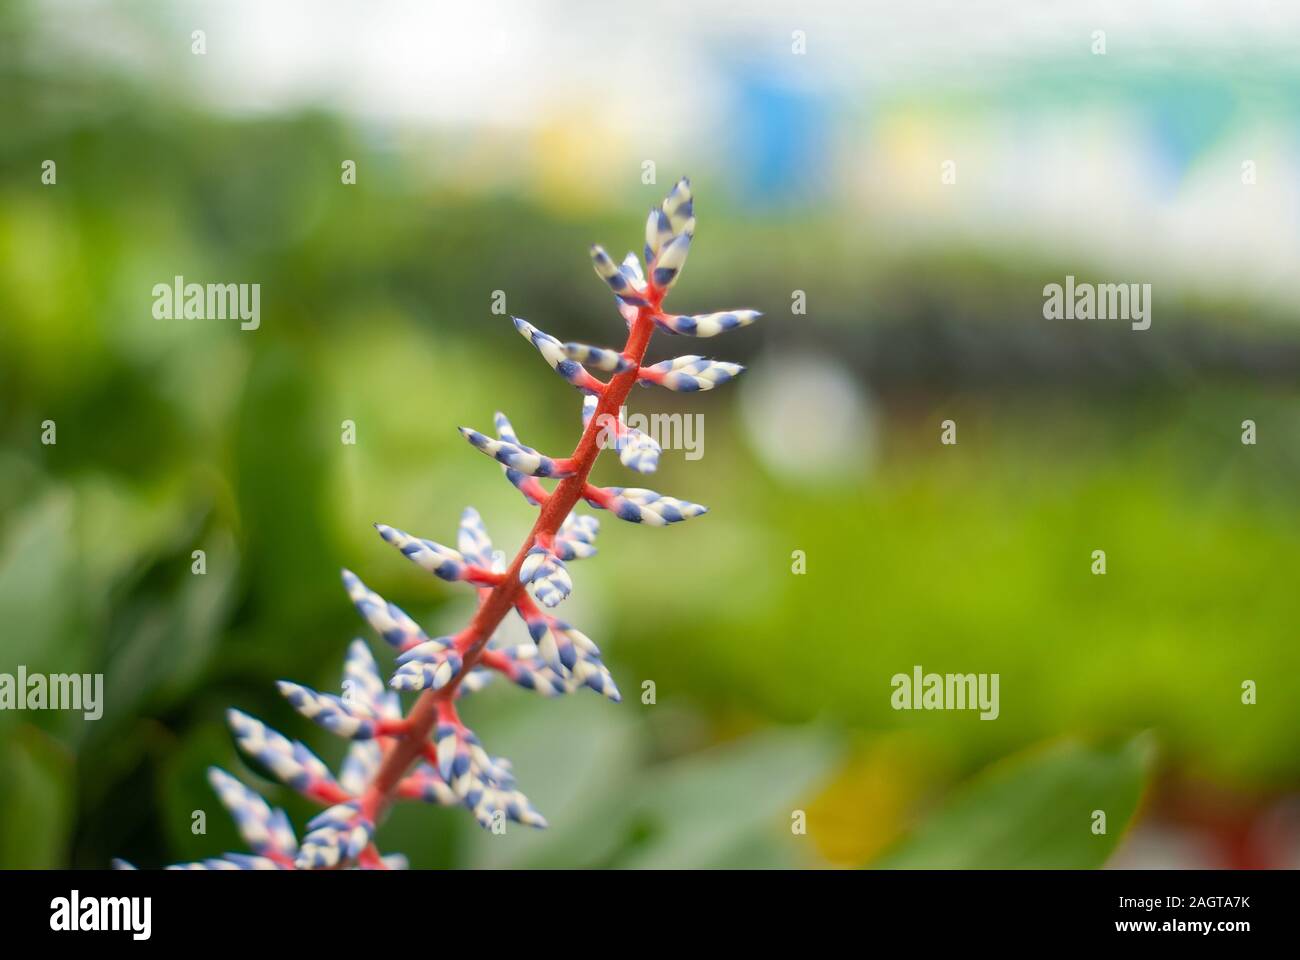 Close-up of white-blue Aechmea inflorescence with young buds on a blurred background Stock Photo